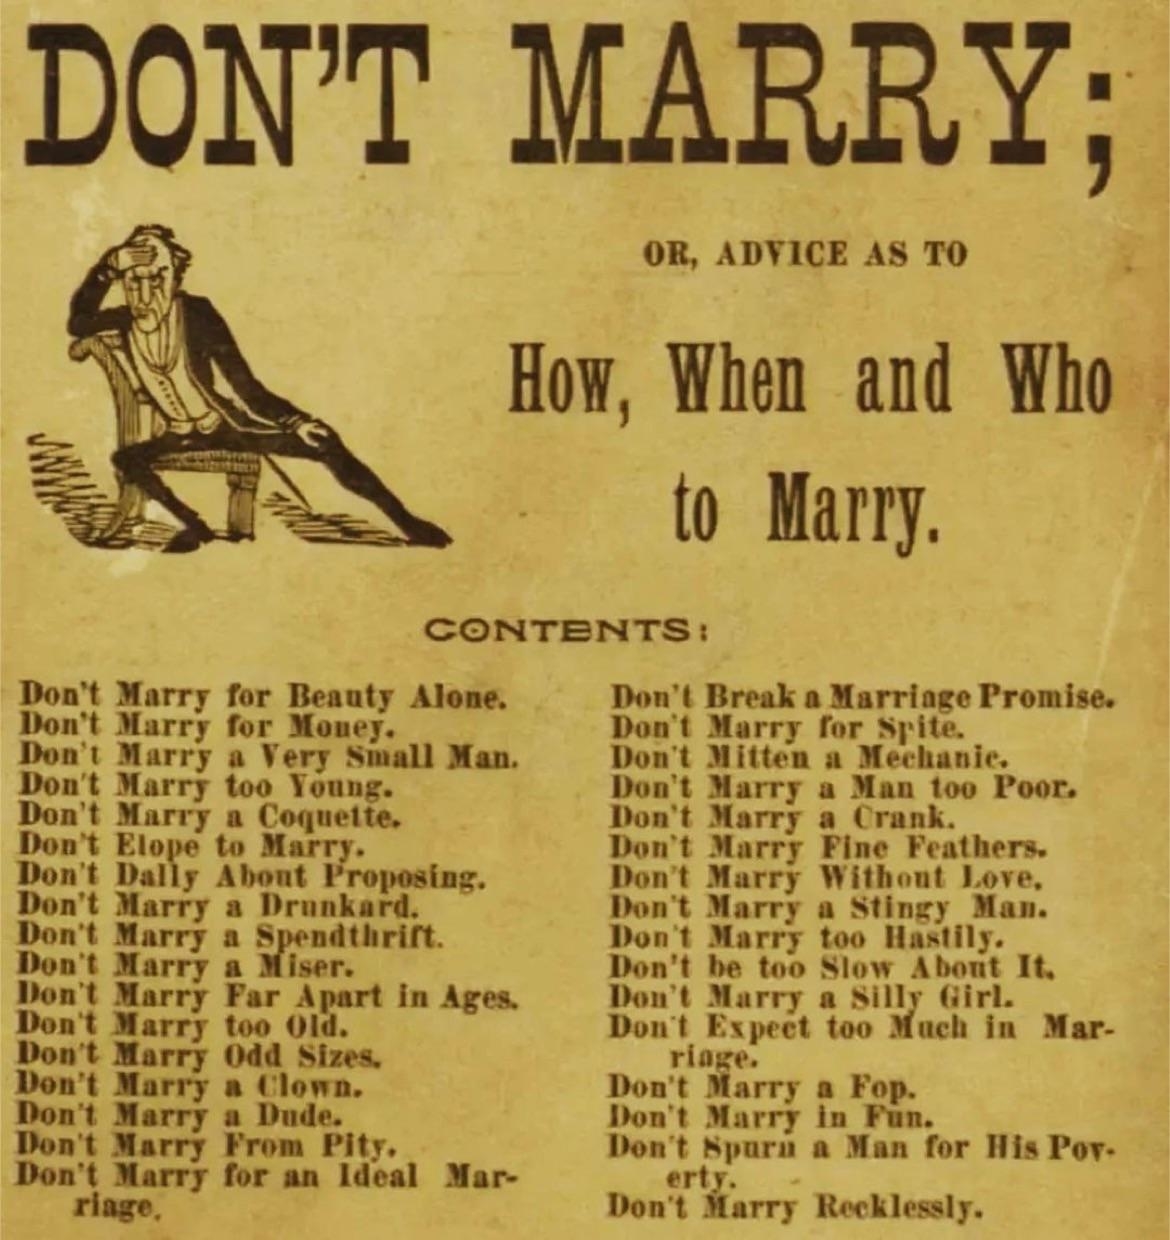 A pamphlet urging not to marry specific people